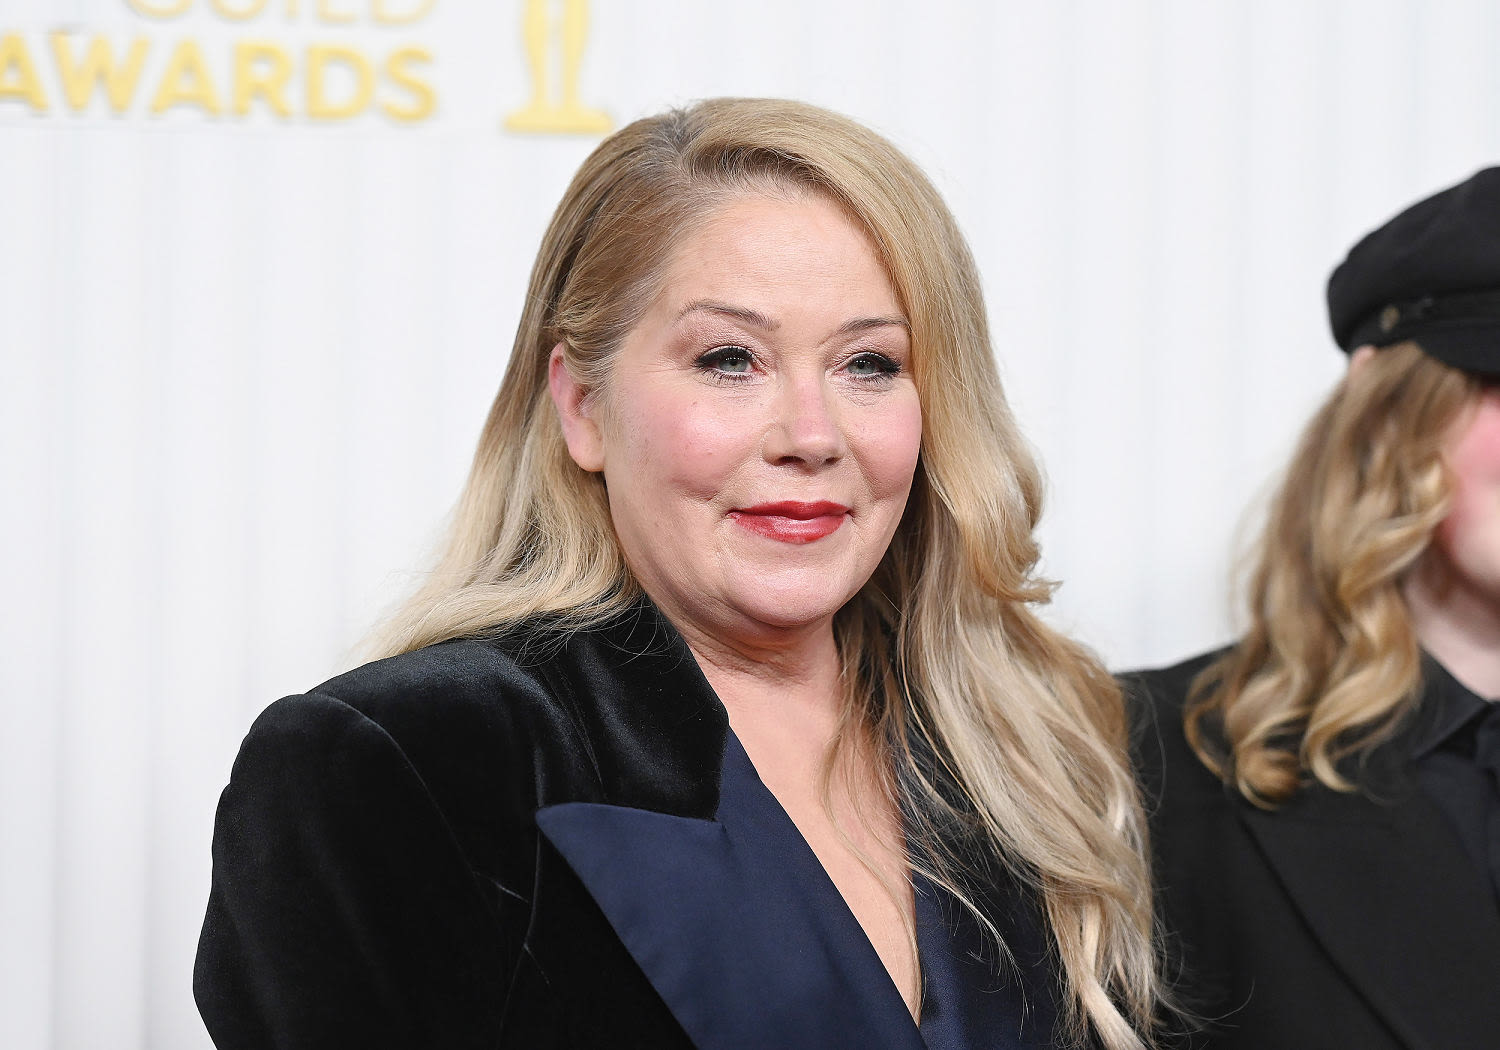 Christina Applegate says she's in a 'real depression' due to MS symptoms: 'Kind of scaring me'